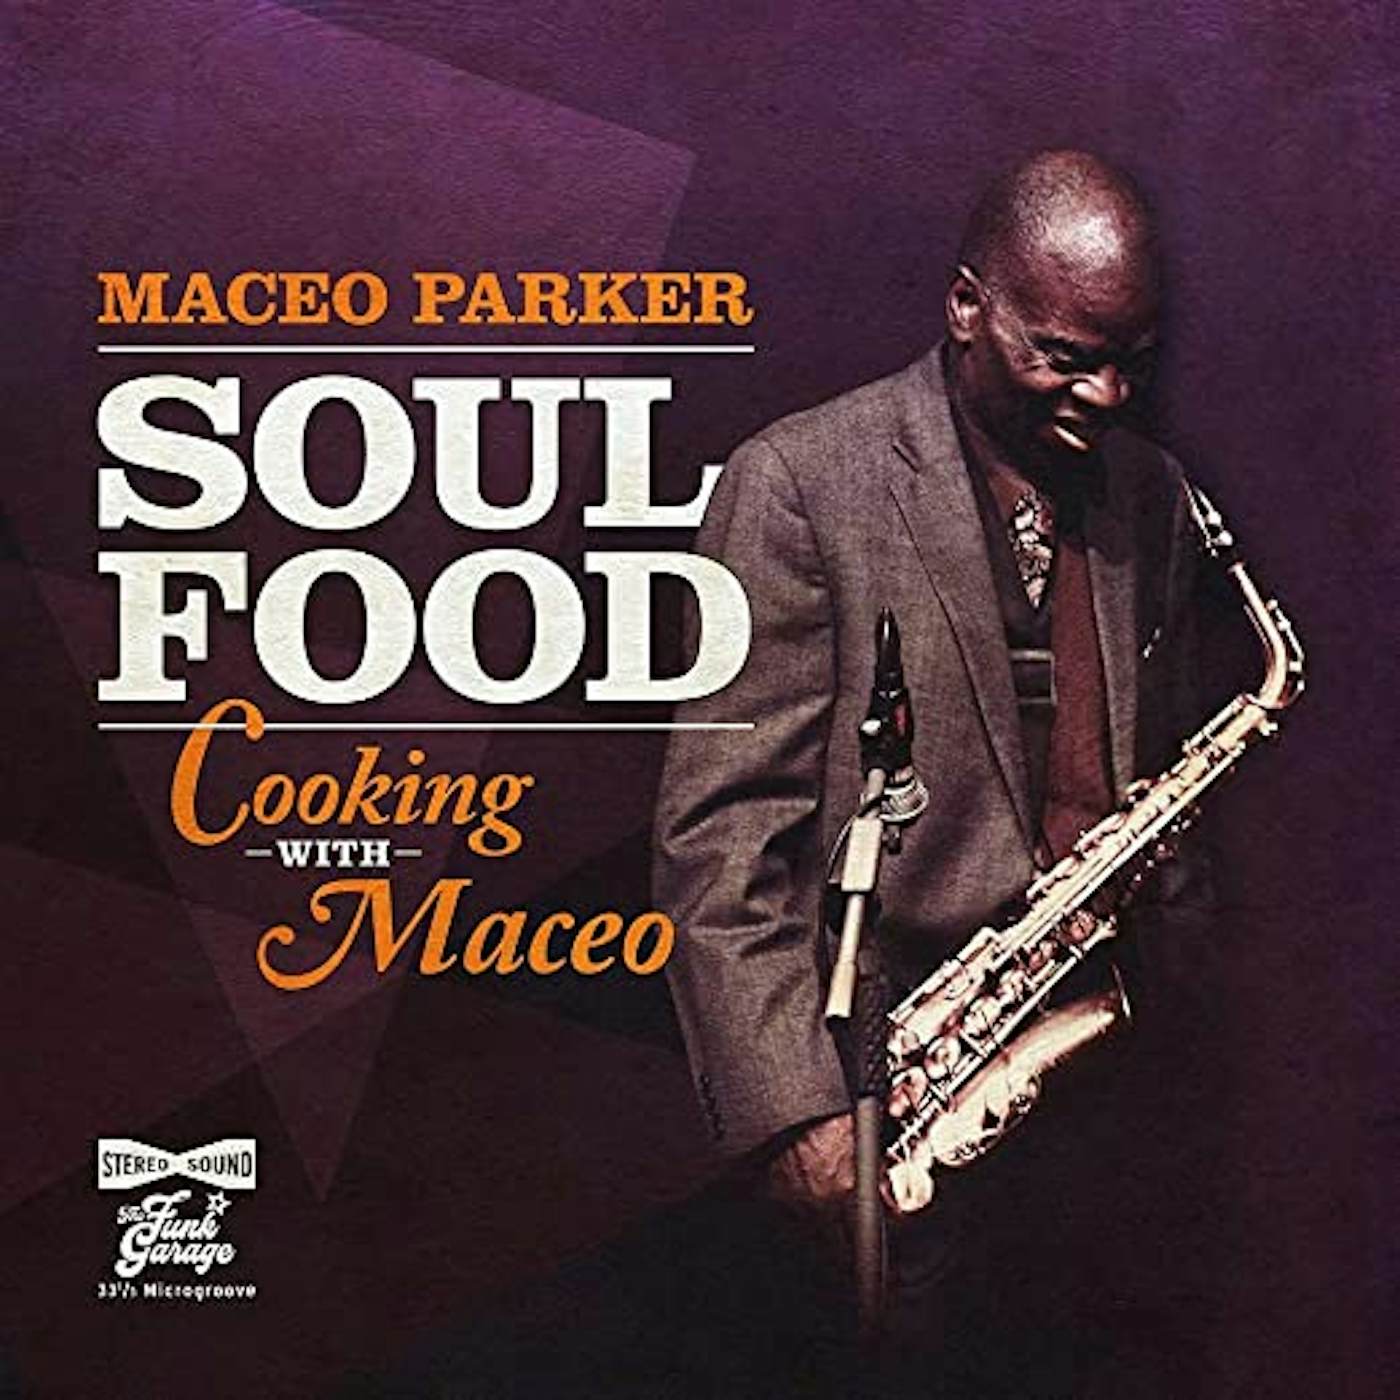 Maceo Parker SOUL FOOD - COOKING WITH MACEO Vinyl Record